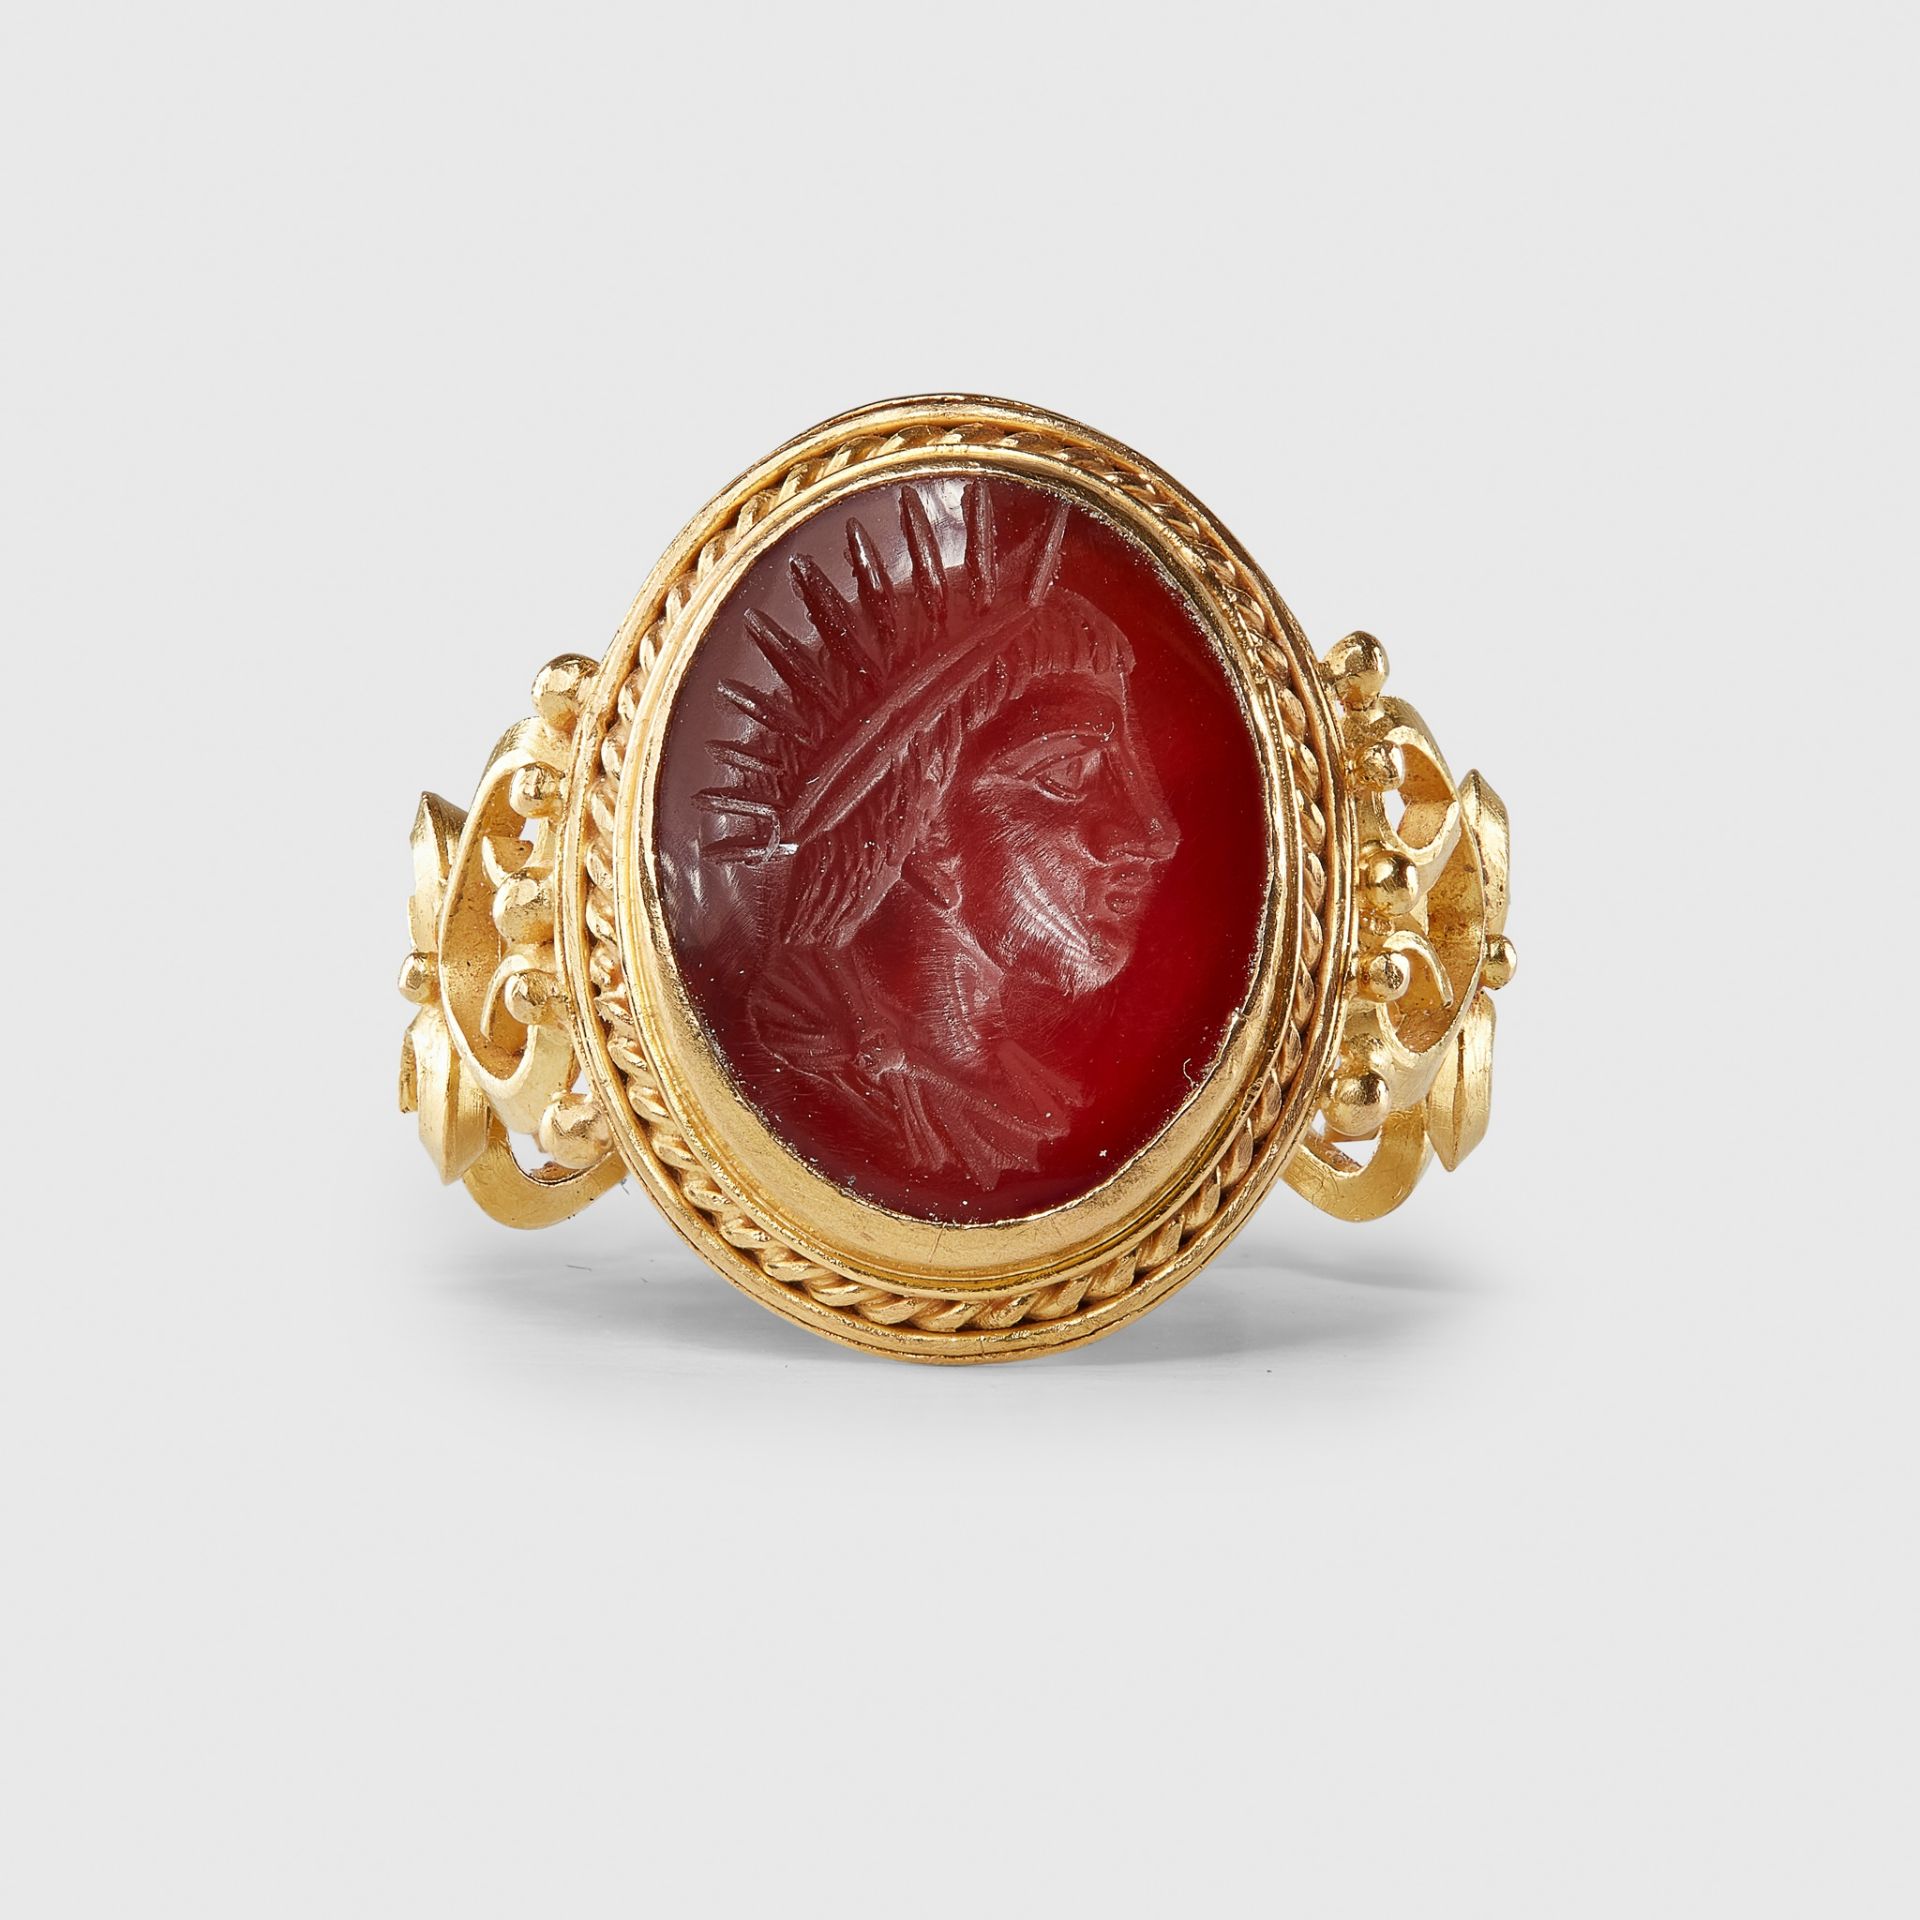 ROMAN GOLD AND CARNELIAN FINGER RING EUROPE, MID 3RD CENTURY A.D.